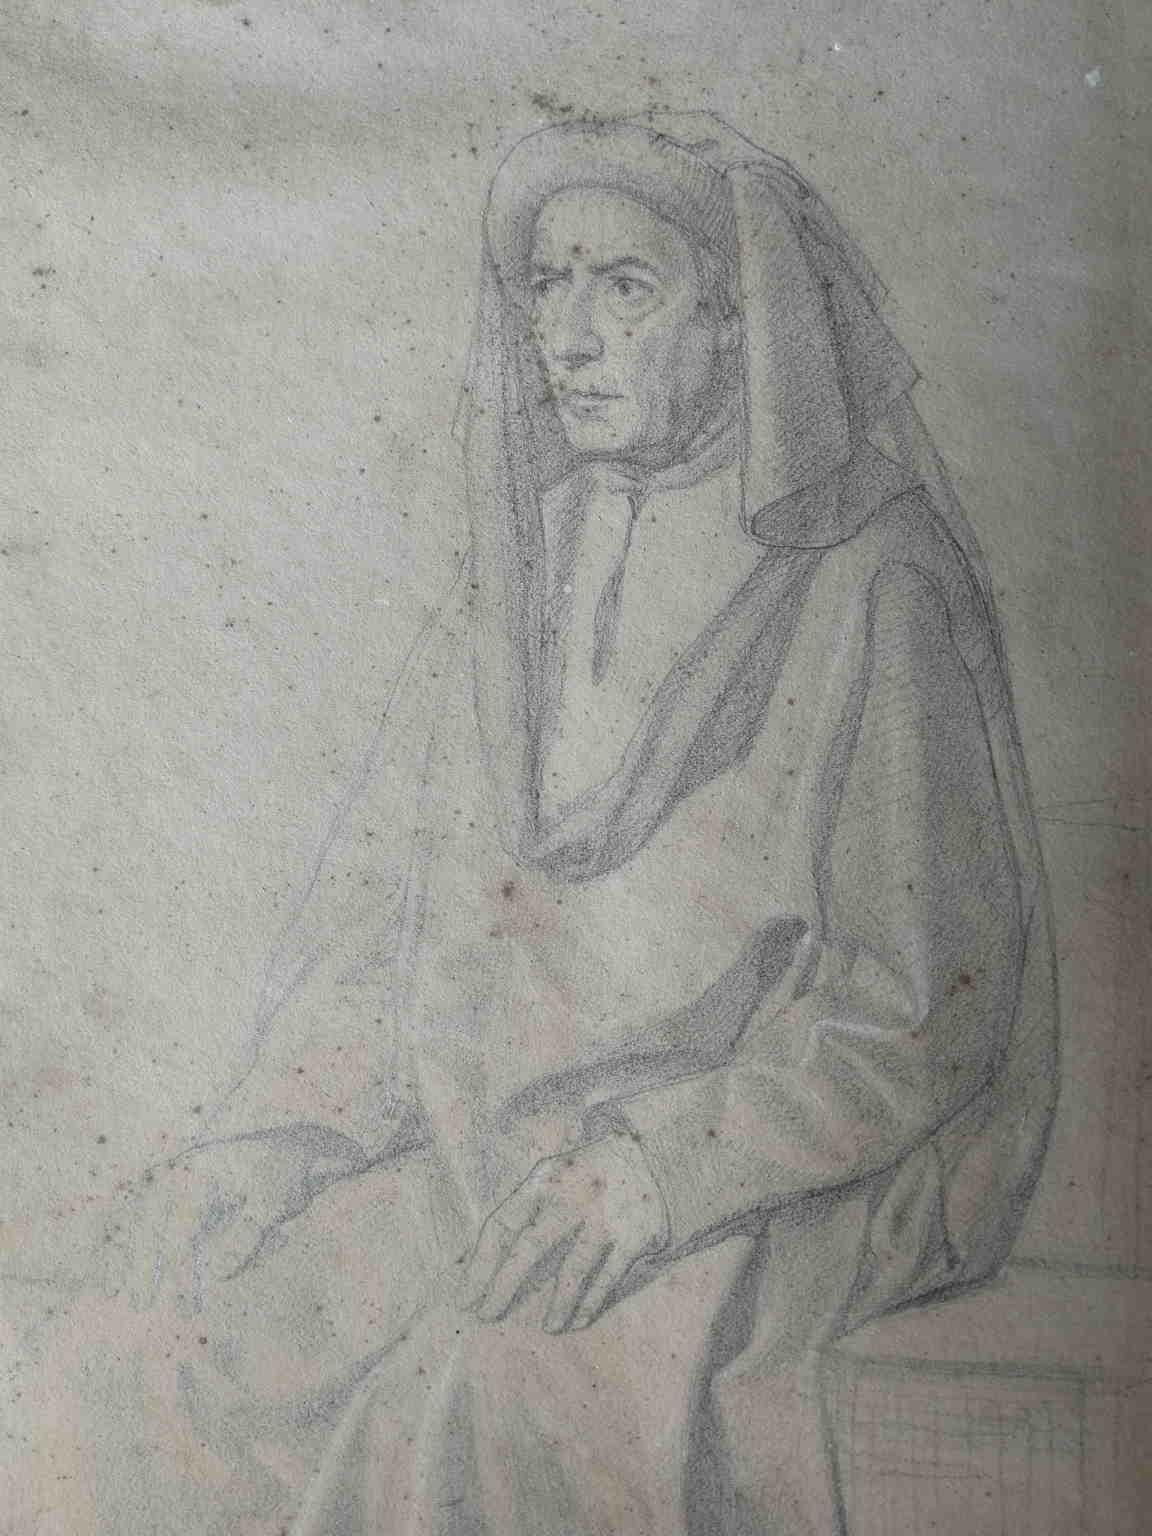 Attributed Cristiano Banti Historical Portrait Drawing 19 century